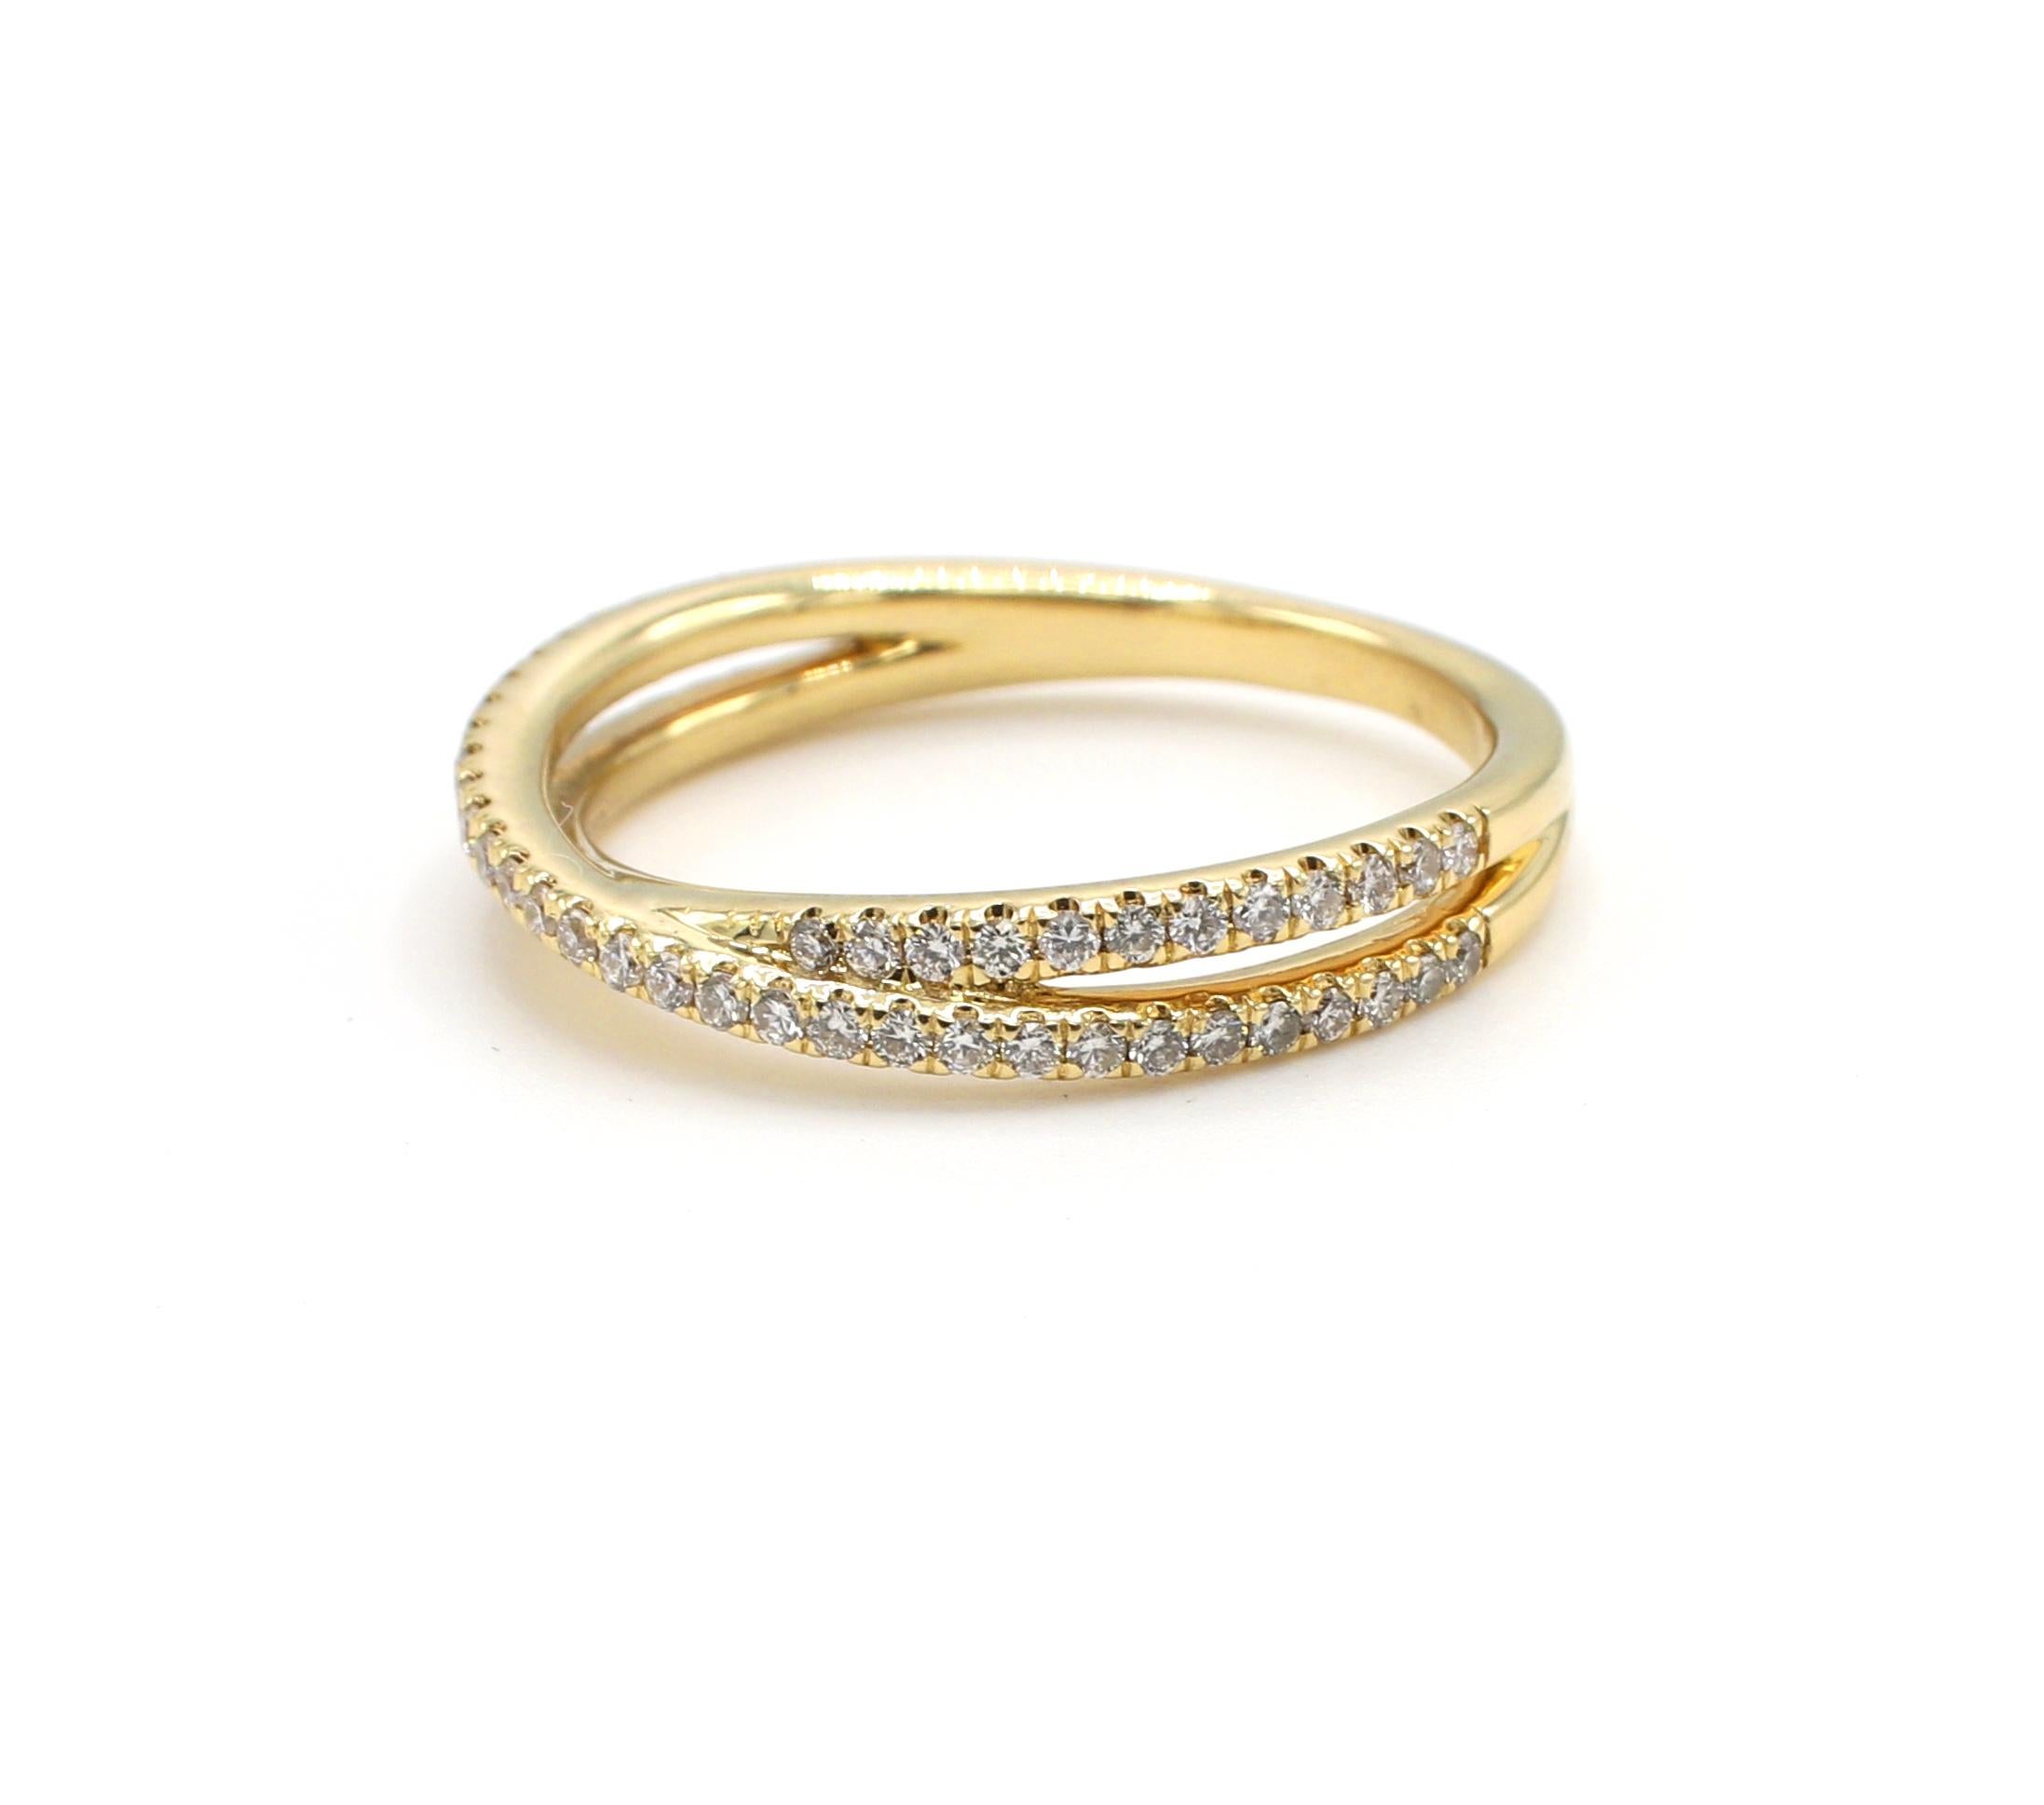 Gabriel & Co. 14K Yellow Gold Crossover 0.32 CTW Stackable Diamond Band Ring Size 6.5

Metal: 14k yellow gold
Weight: 2.63 grams
Diamonds: Approx. 0.32 CTW G VS
Signed: Gabriel & Co. S901303 14K 
Size: 6.5 (US)